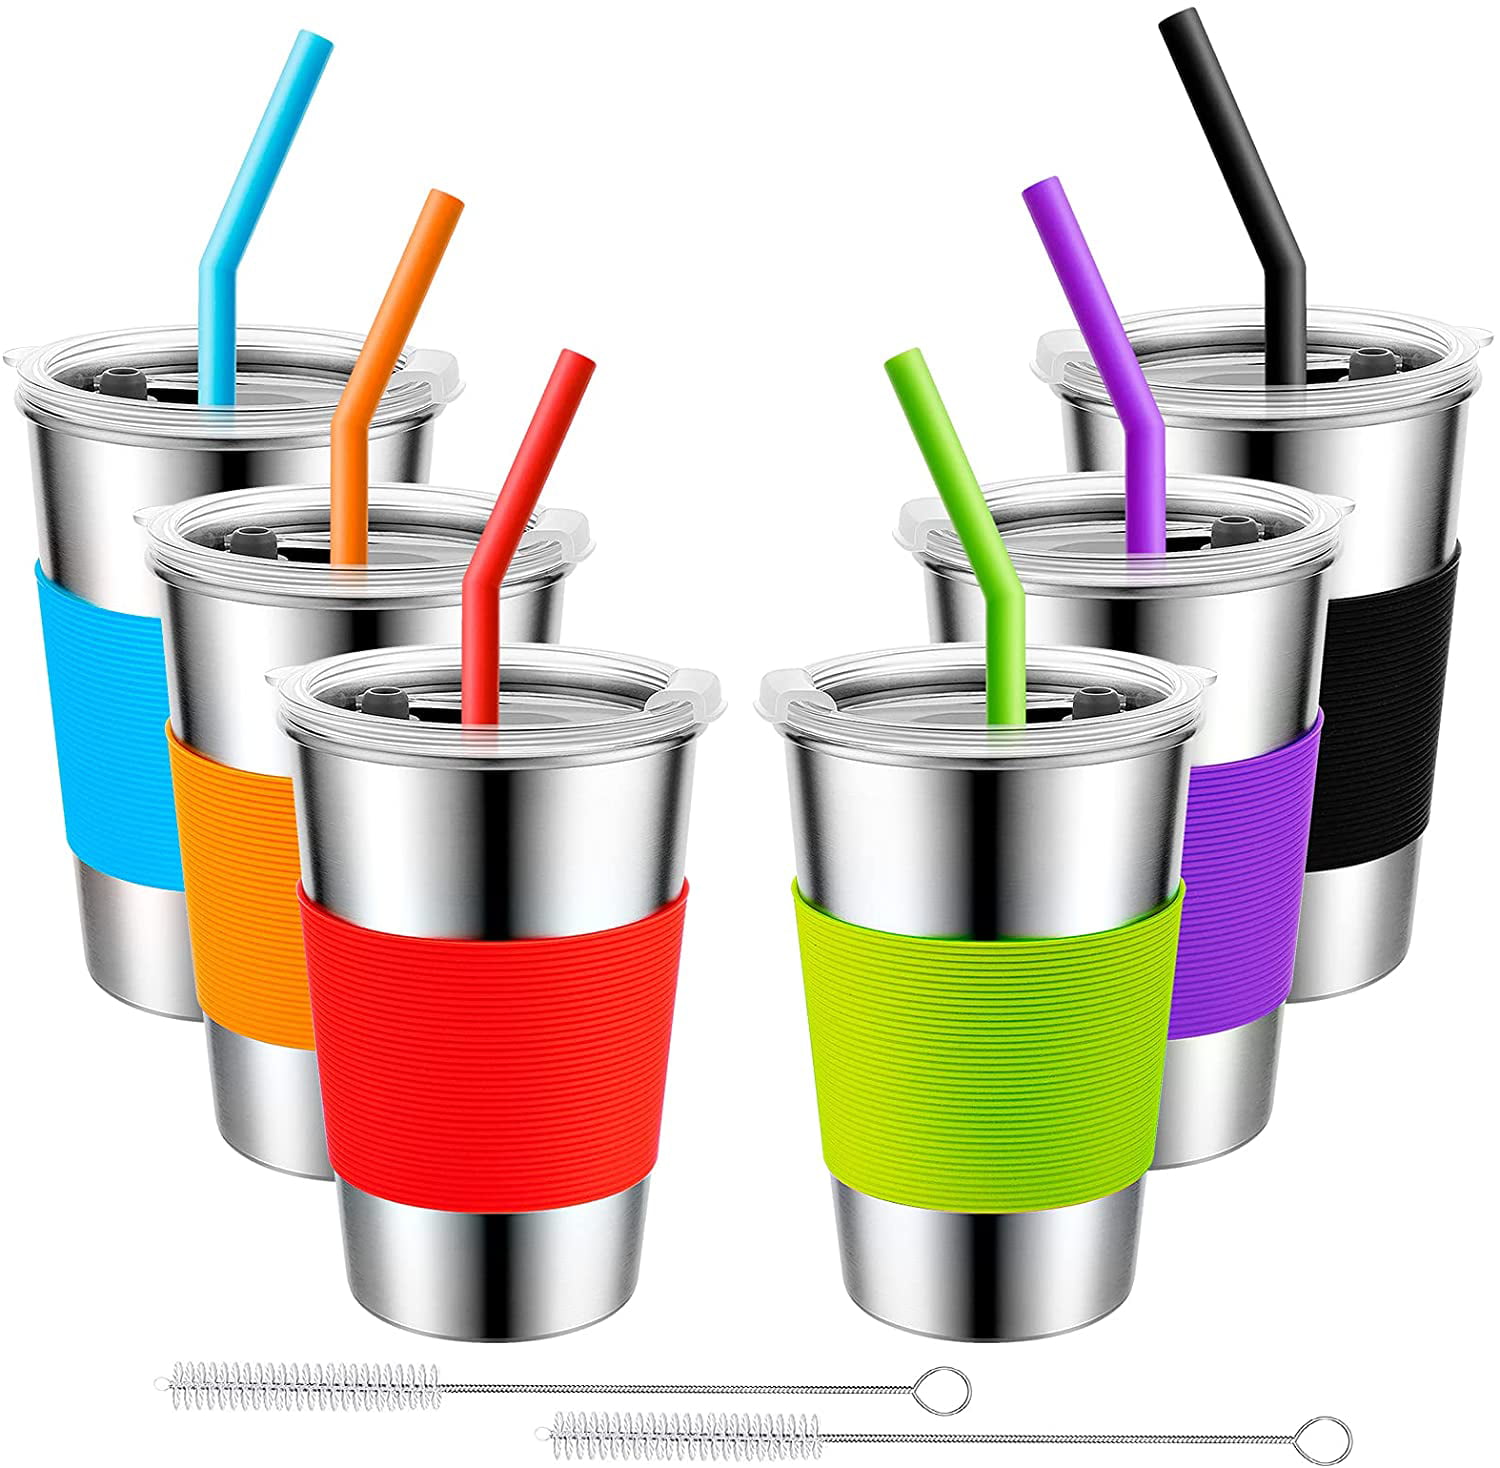 16 Oz Drinking Tumbler with Silicone Sleeves for Kids/Adults 4 Pack Stainless Steel Cups with Lids and Straws Unbreakable Metal 